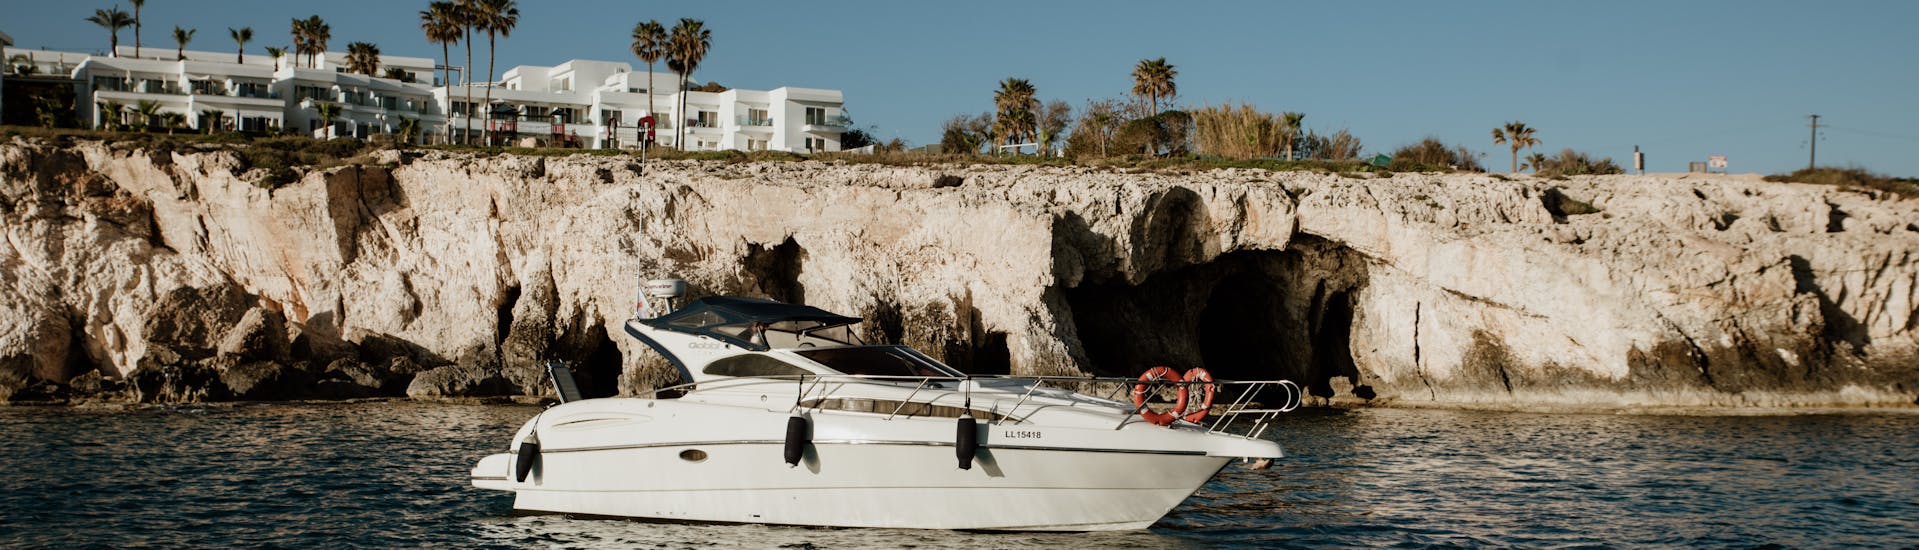 Boat in front of the coastline during the private luxury boat trip from Ayia Napa with swimming stops with Azure Yacht Club Cyprus with Azure Yacht Club Cyprus.